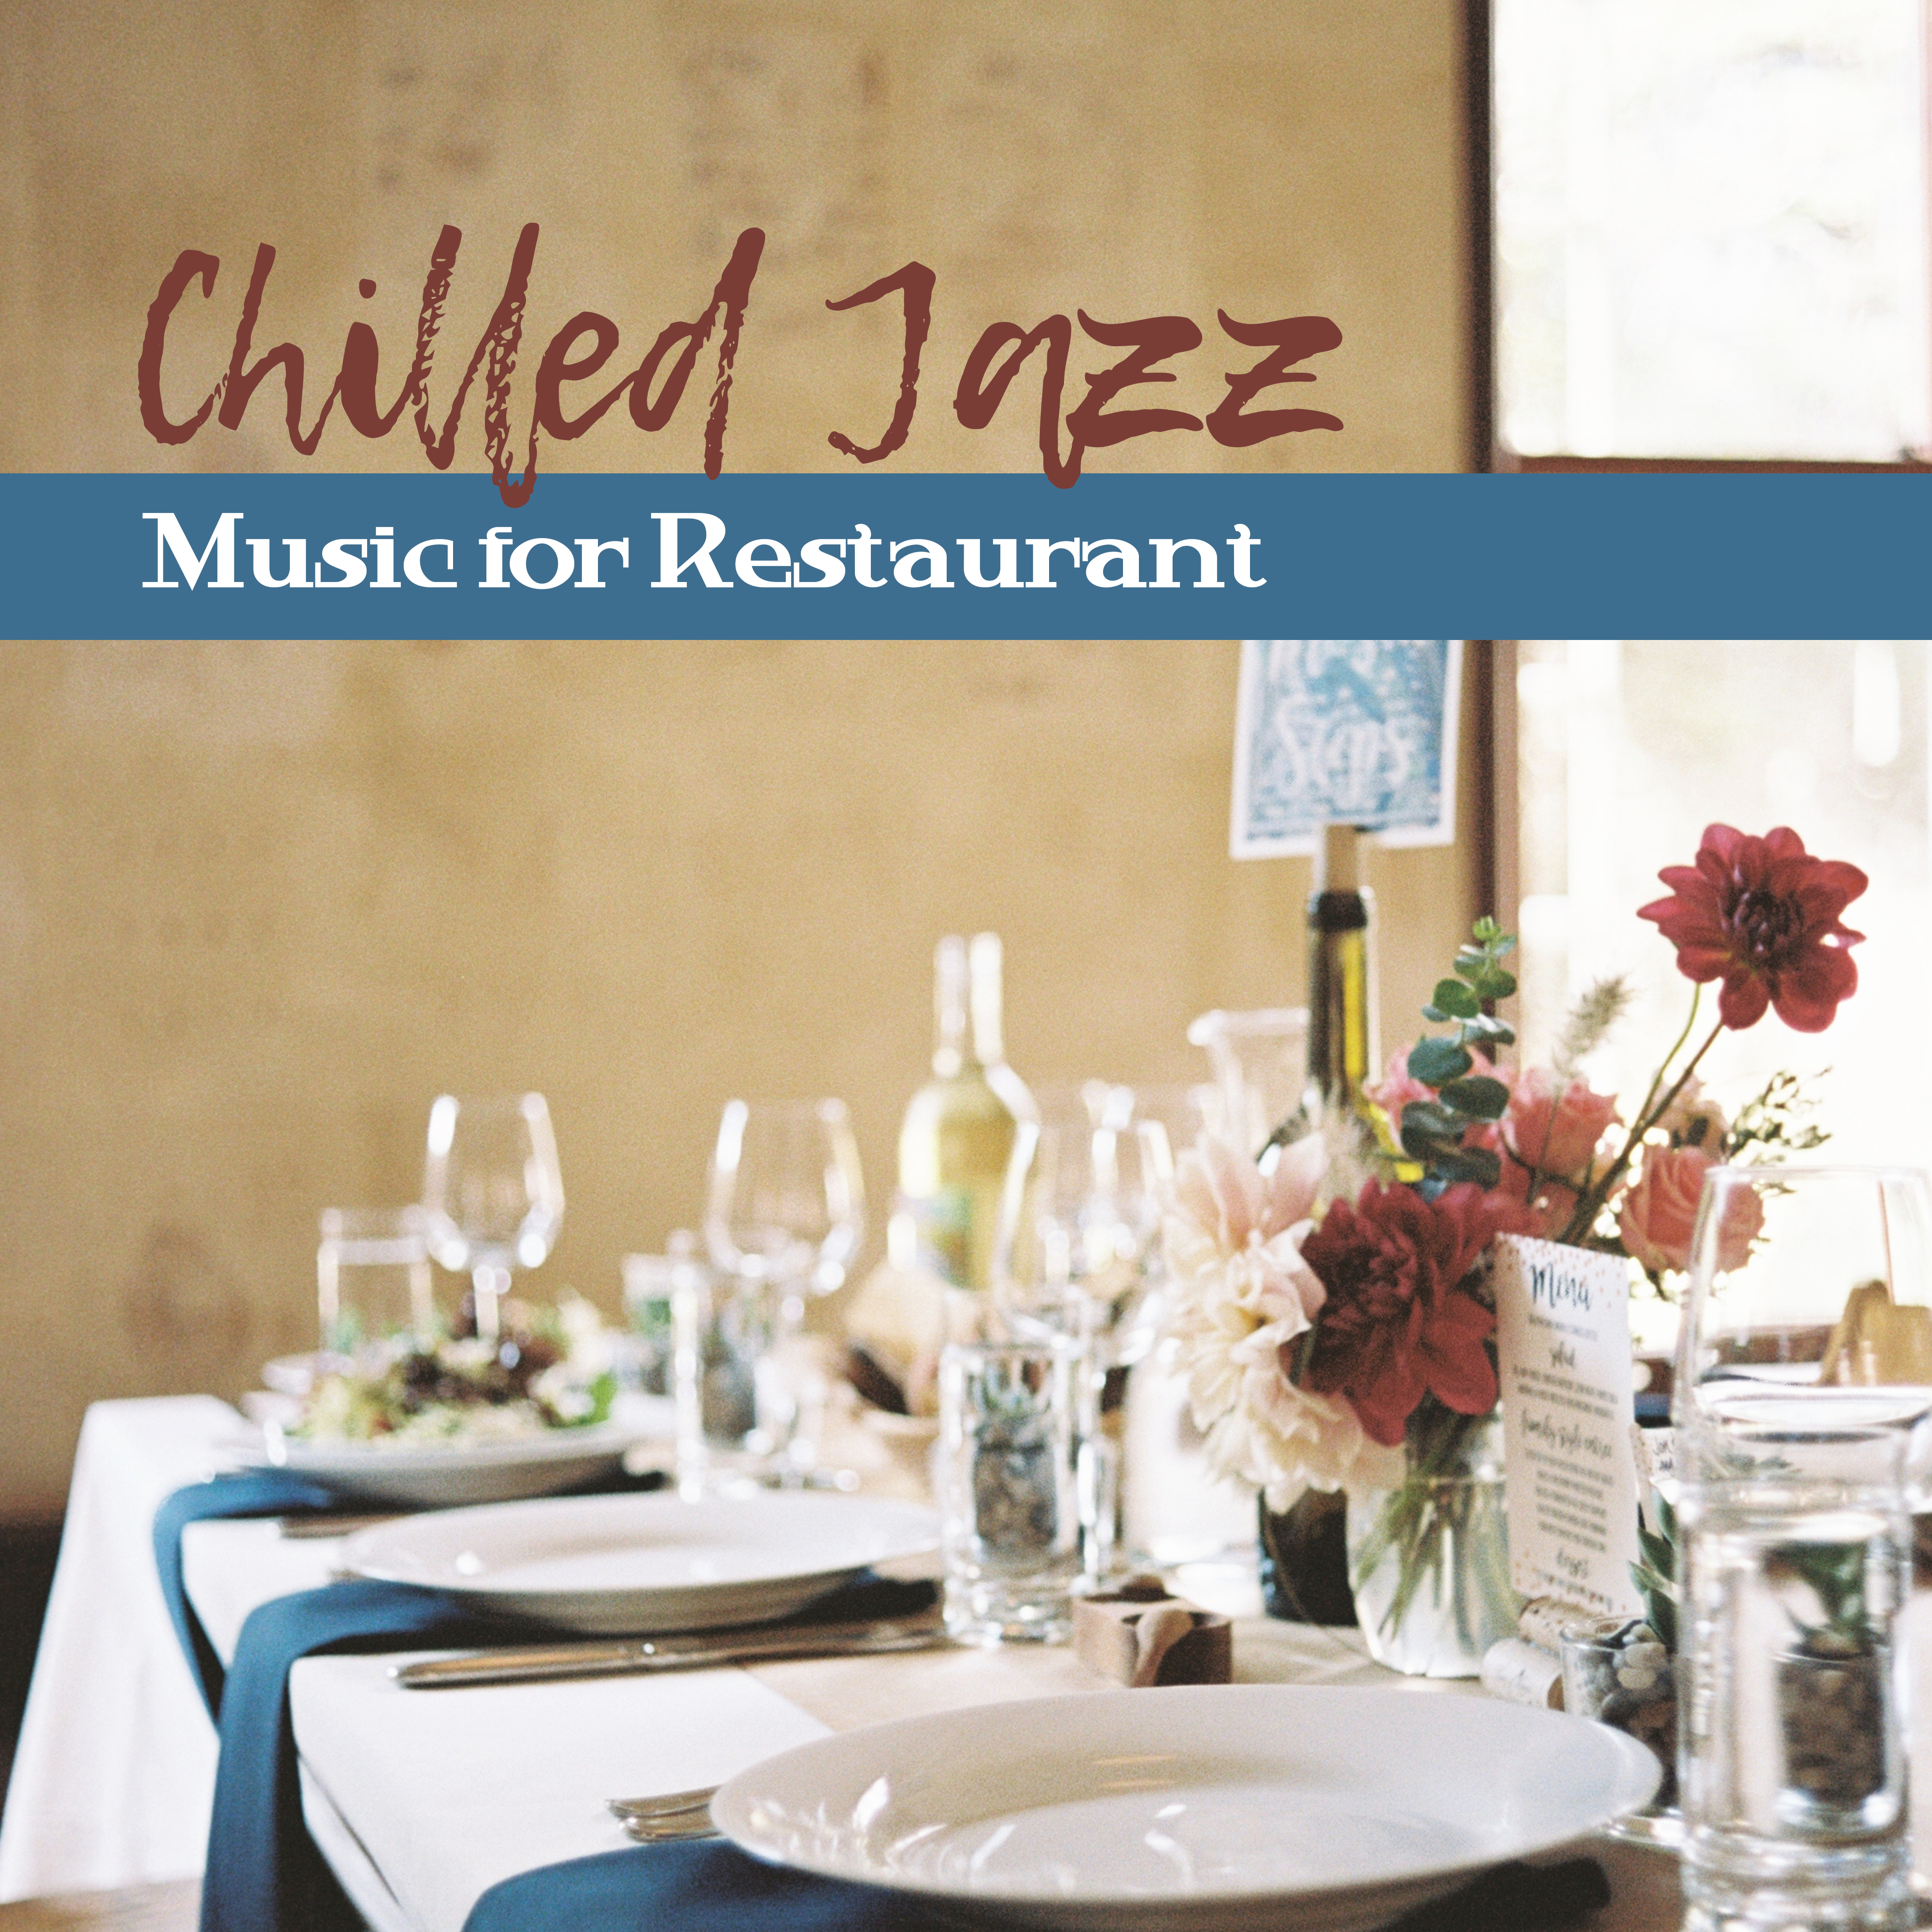 Chilled Jazz Music for Restaurant  Easy Listening, Stress Relief, Piano Music, Background Restaurant Sounds, Calm Down with Jazz